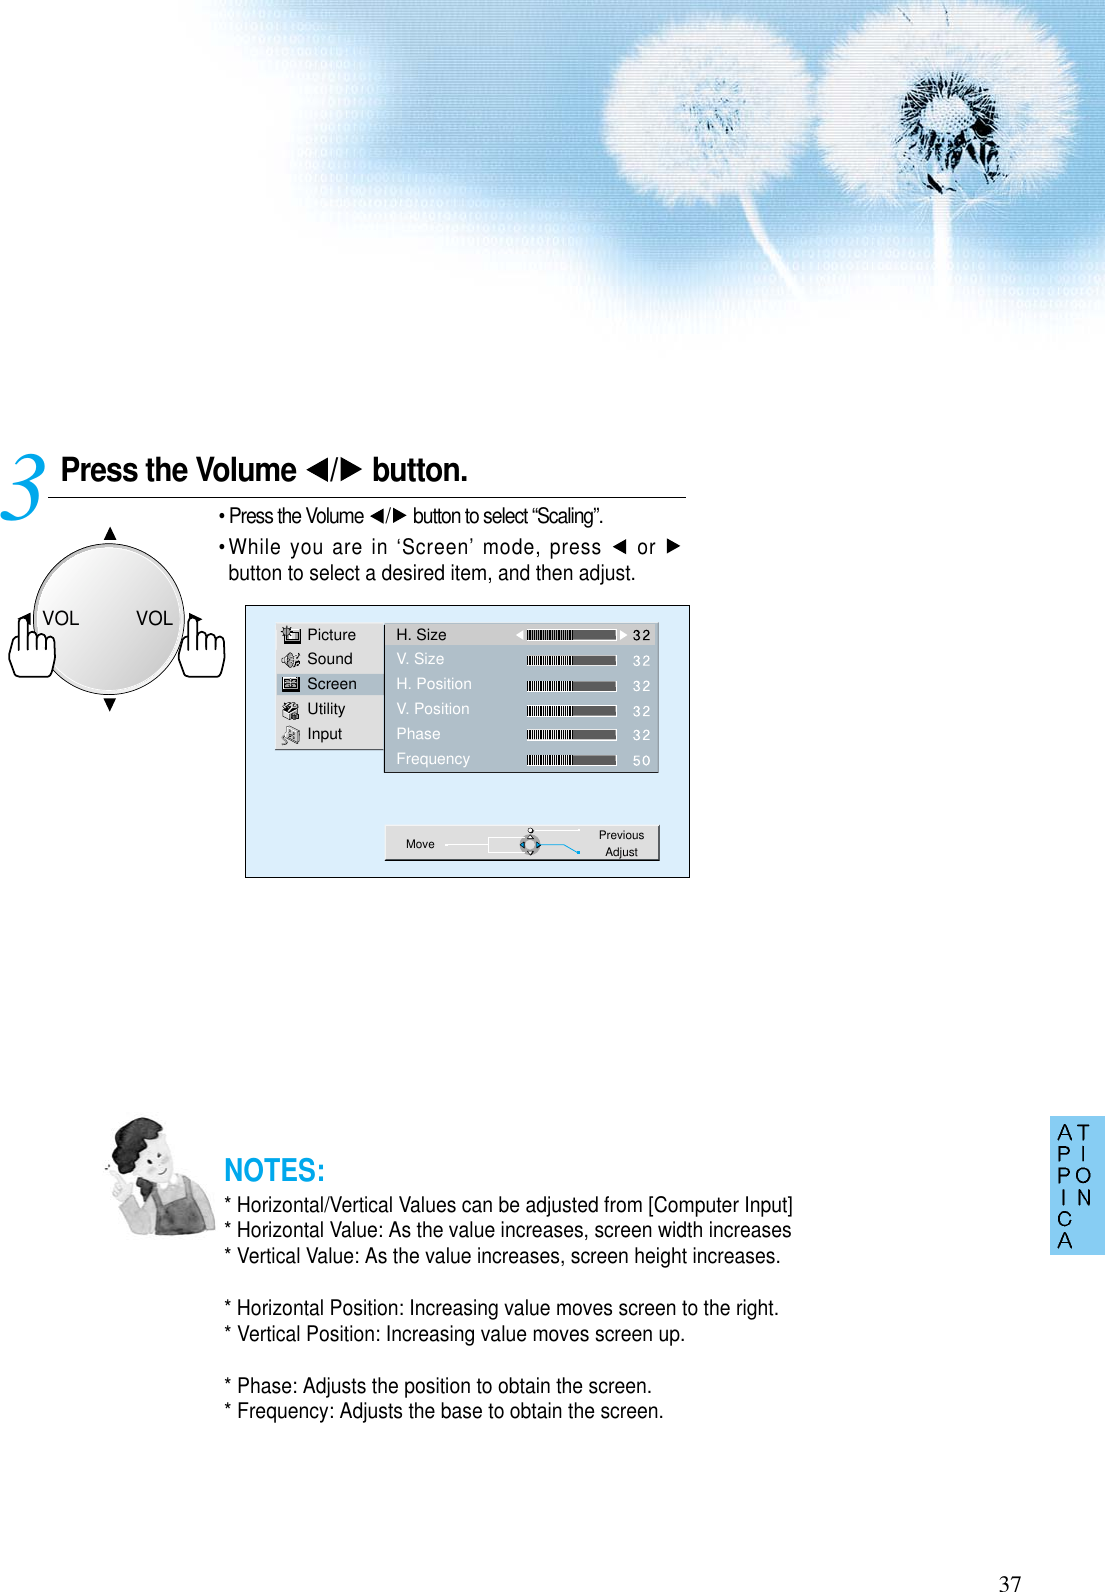 37Press the Volume  / button.• Press the Volume  / button to select “Scaling”.• While you are in ‘Screen’ mode, press  or button to select a desired item, and then adjust.3 PictureSoundScreenUtilityInputH. SizeV. SizeH. PositionV. PositionPhaseFrequencyMove PreviousAdjustNOTES:* Horizontal/Vertical Values can be adjusted from [Computer Input]* Horizontal Value: As the value increases, screen width increases* Vertical Value: As the value increases, screen height increases.* Horizontal Position: Increasing value moves screen to the right.* Vertical Position: Increasing value moves screen up.* Phase: Adjusts the position to obtain the screen.* Frequency: Adjusts the base to obtain the screen.VOLVOL